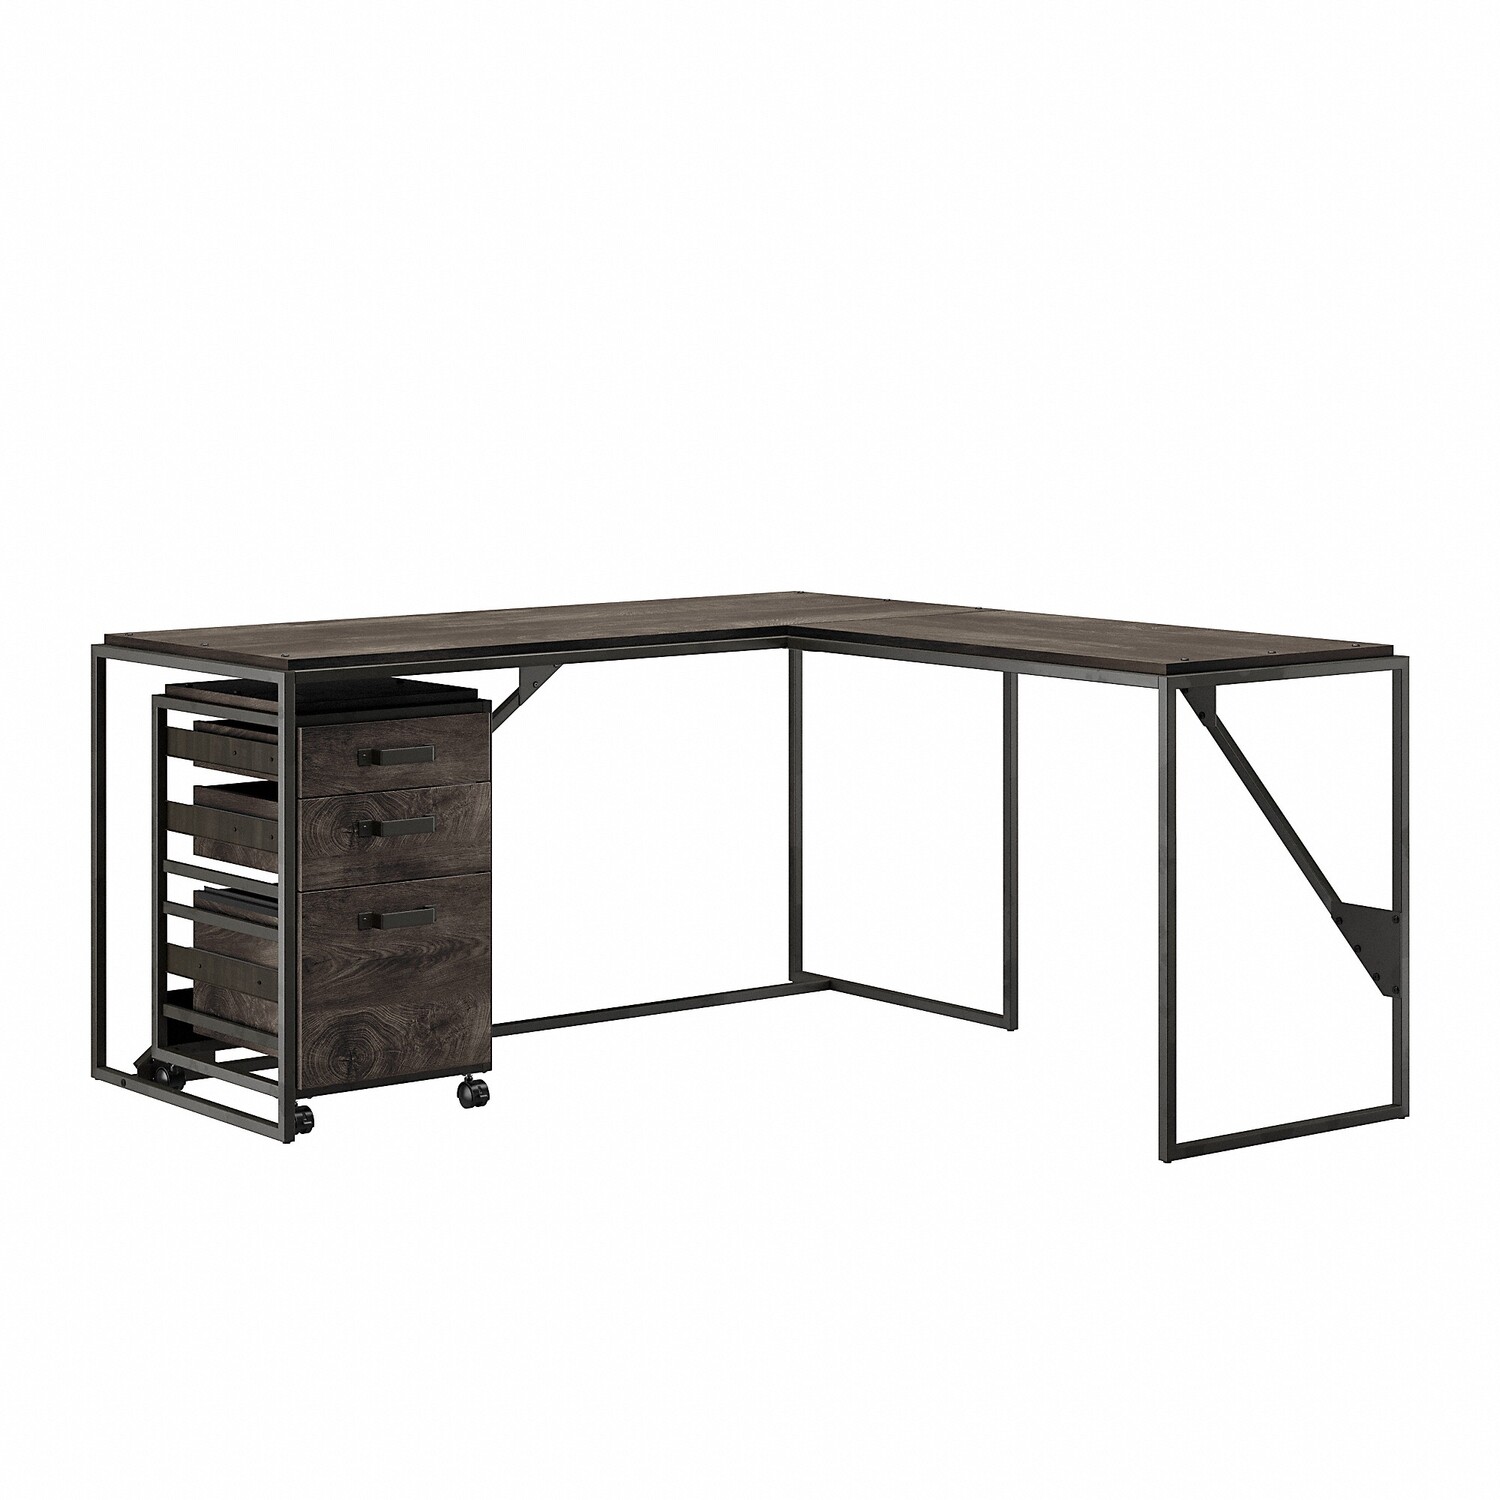 Bush Furniture Refinery 62W L Shaped Industrial Desk with 3 Drawer Mobile File Cabinet - image 1 of 6